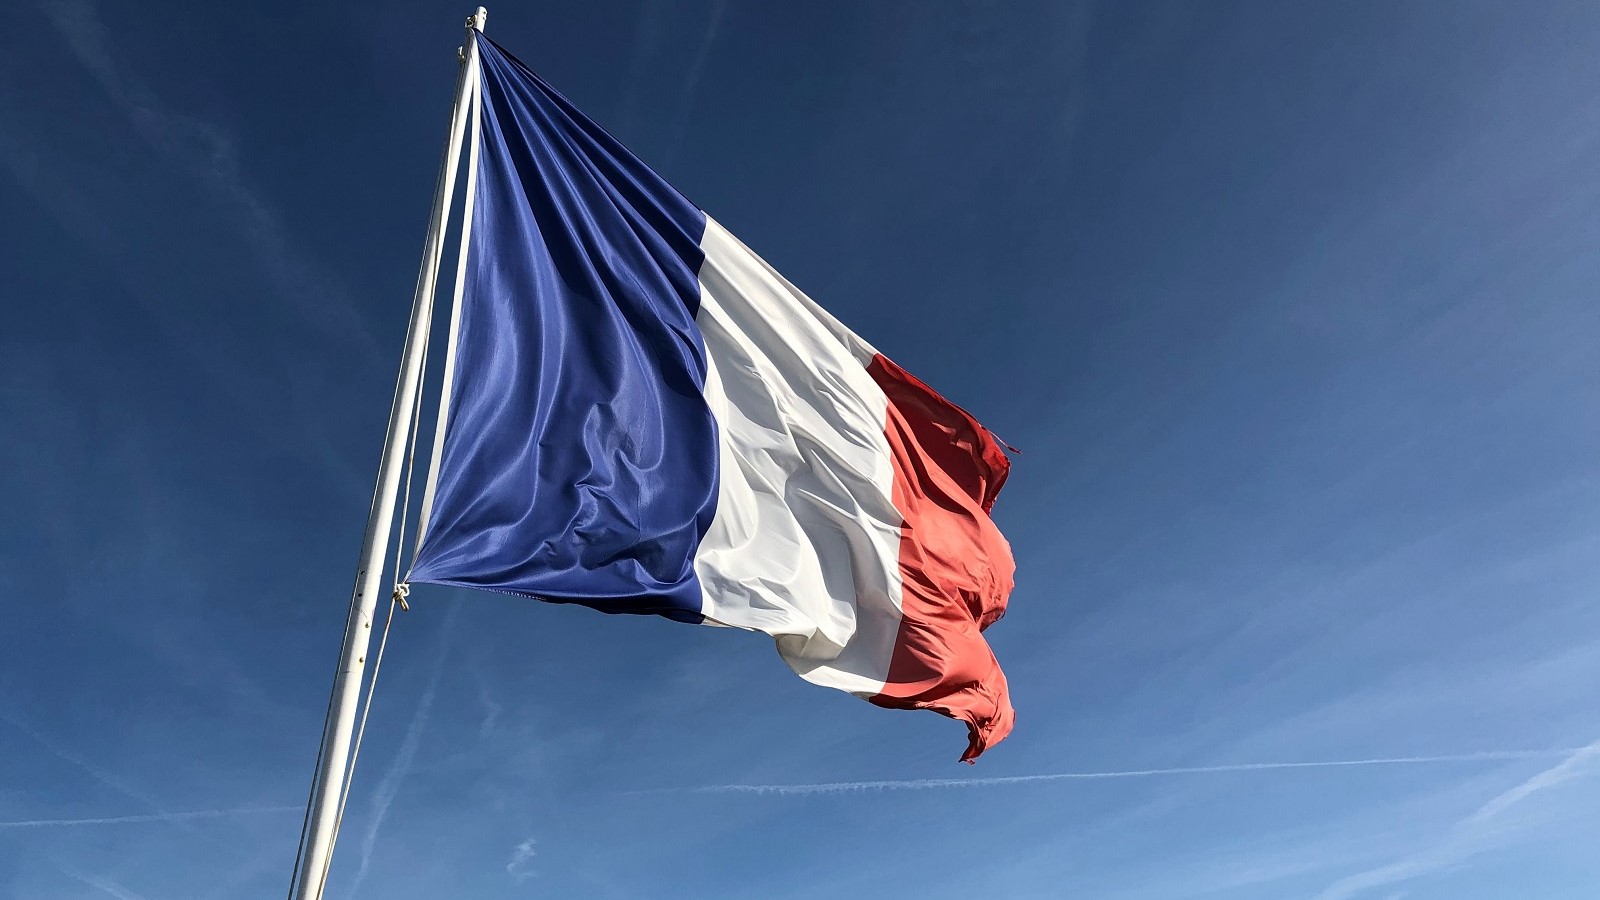 French flag flying on a pole with a blue sky